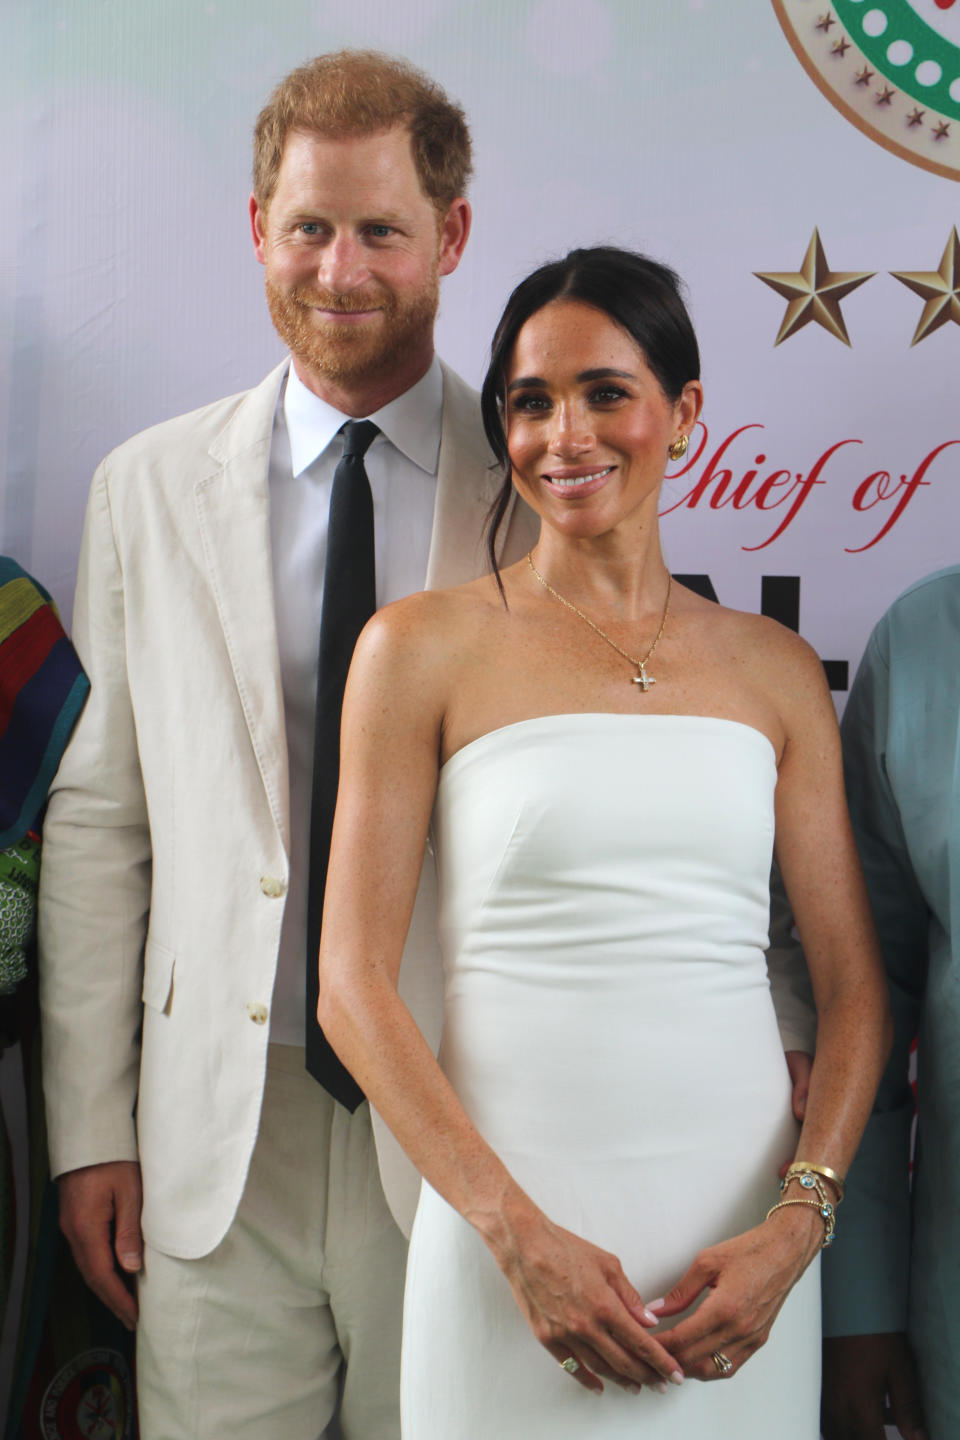 Meghan Markle and Prince Harry at an event in Nigeria